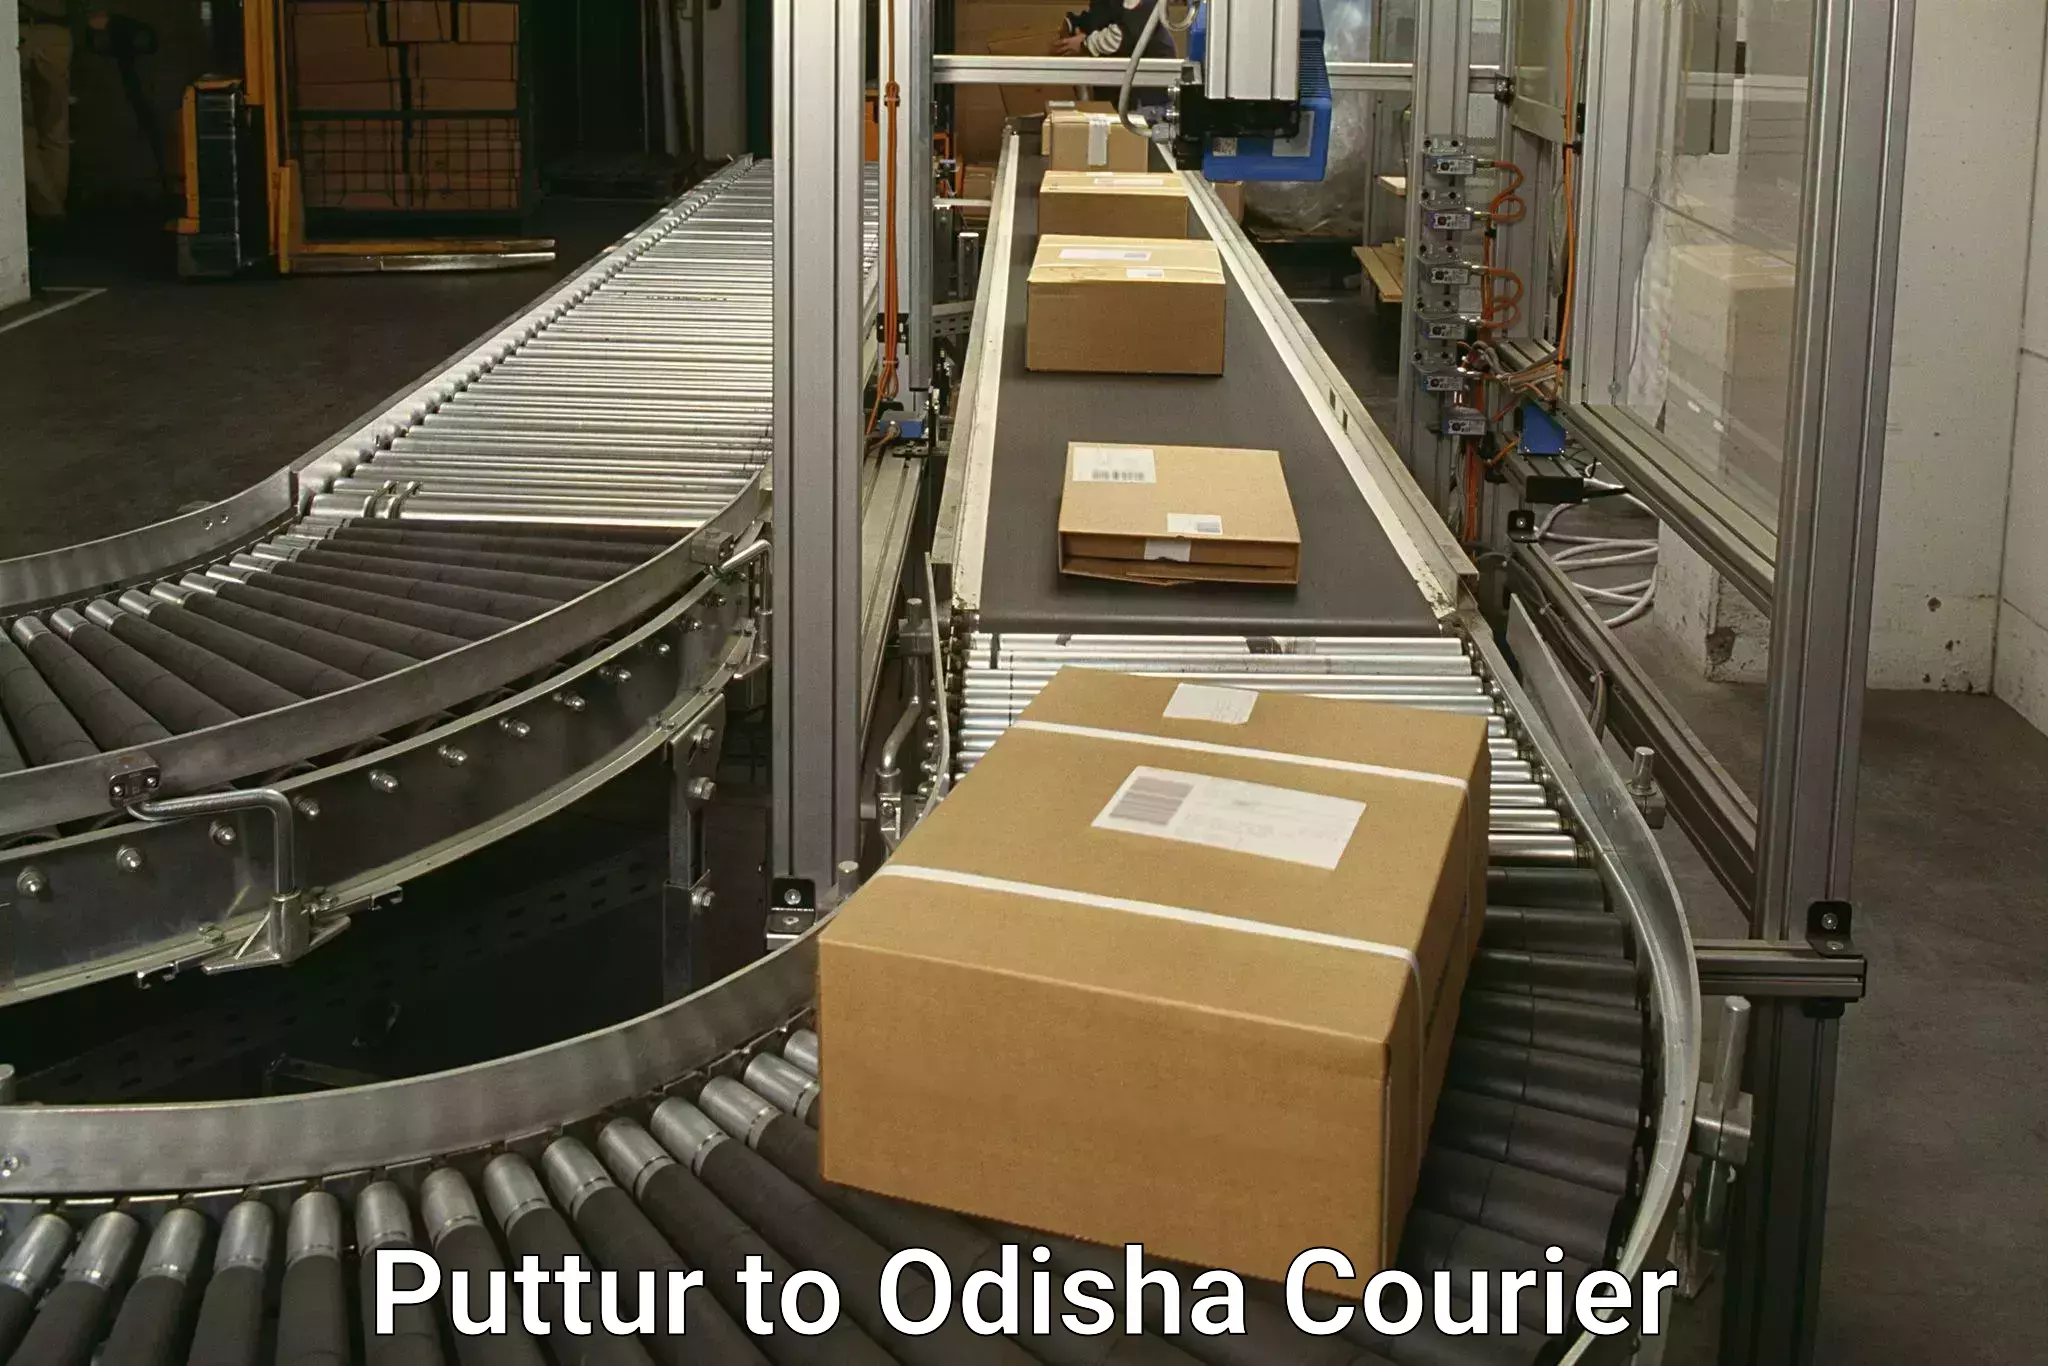 State-of-the-art courier technology Puttur to Umerkote